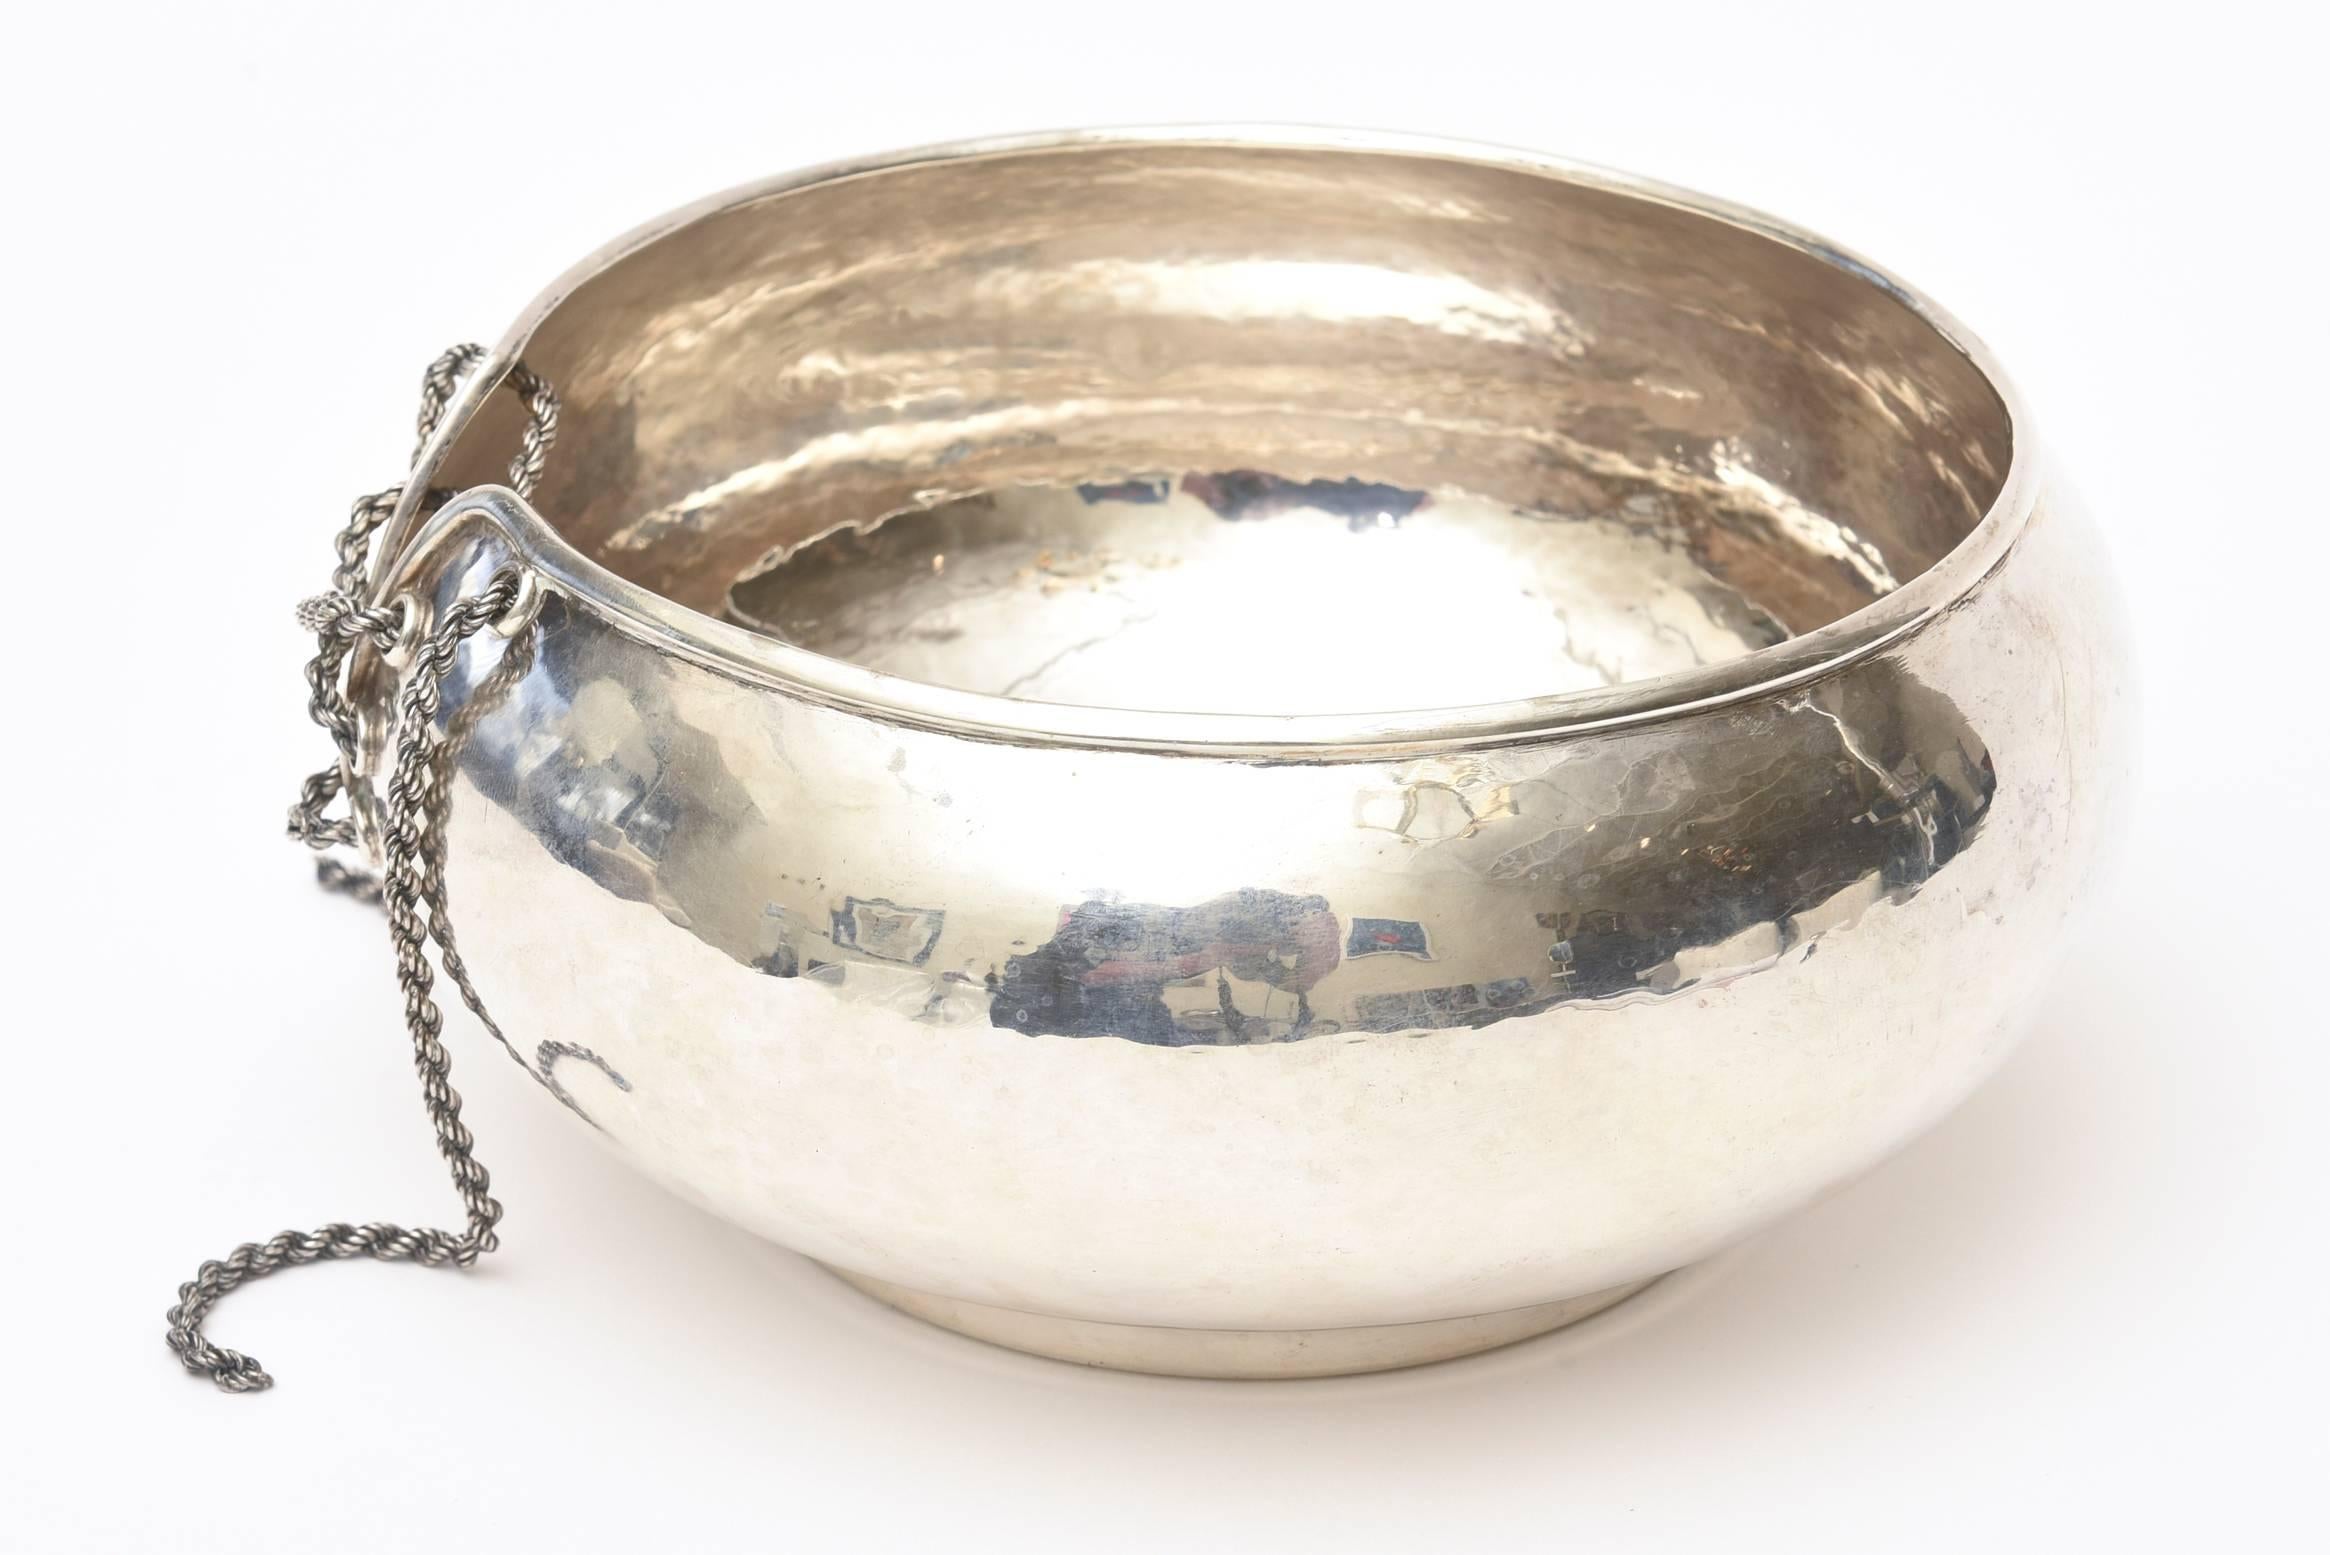 Late 20th Century Sterling Silver Lace Up Chain Bowl or Wine Caddy Italian Barware Vintage